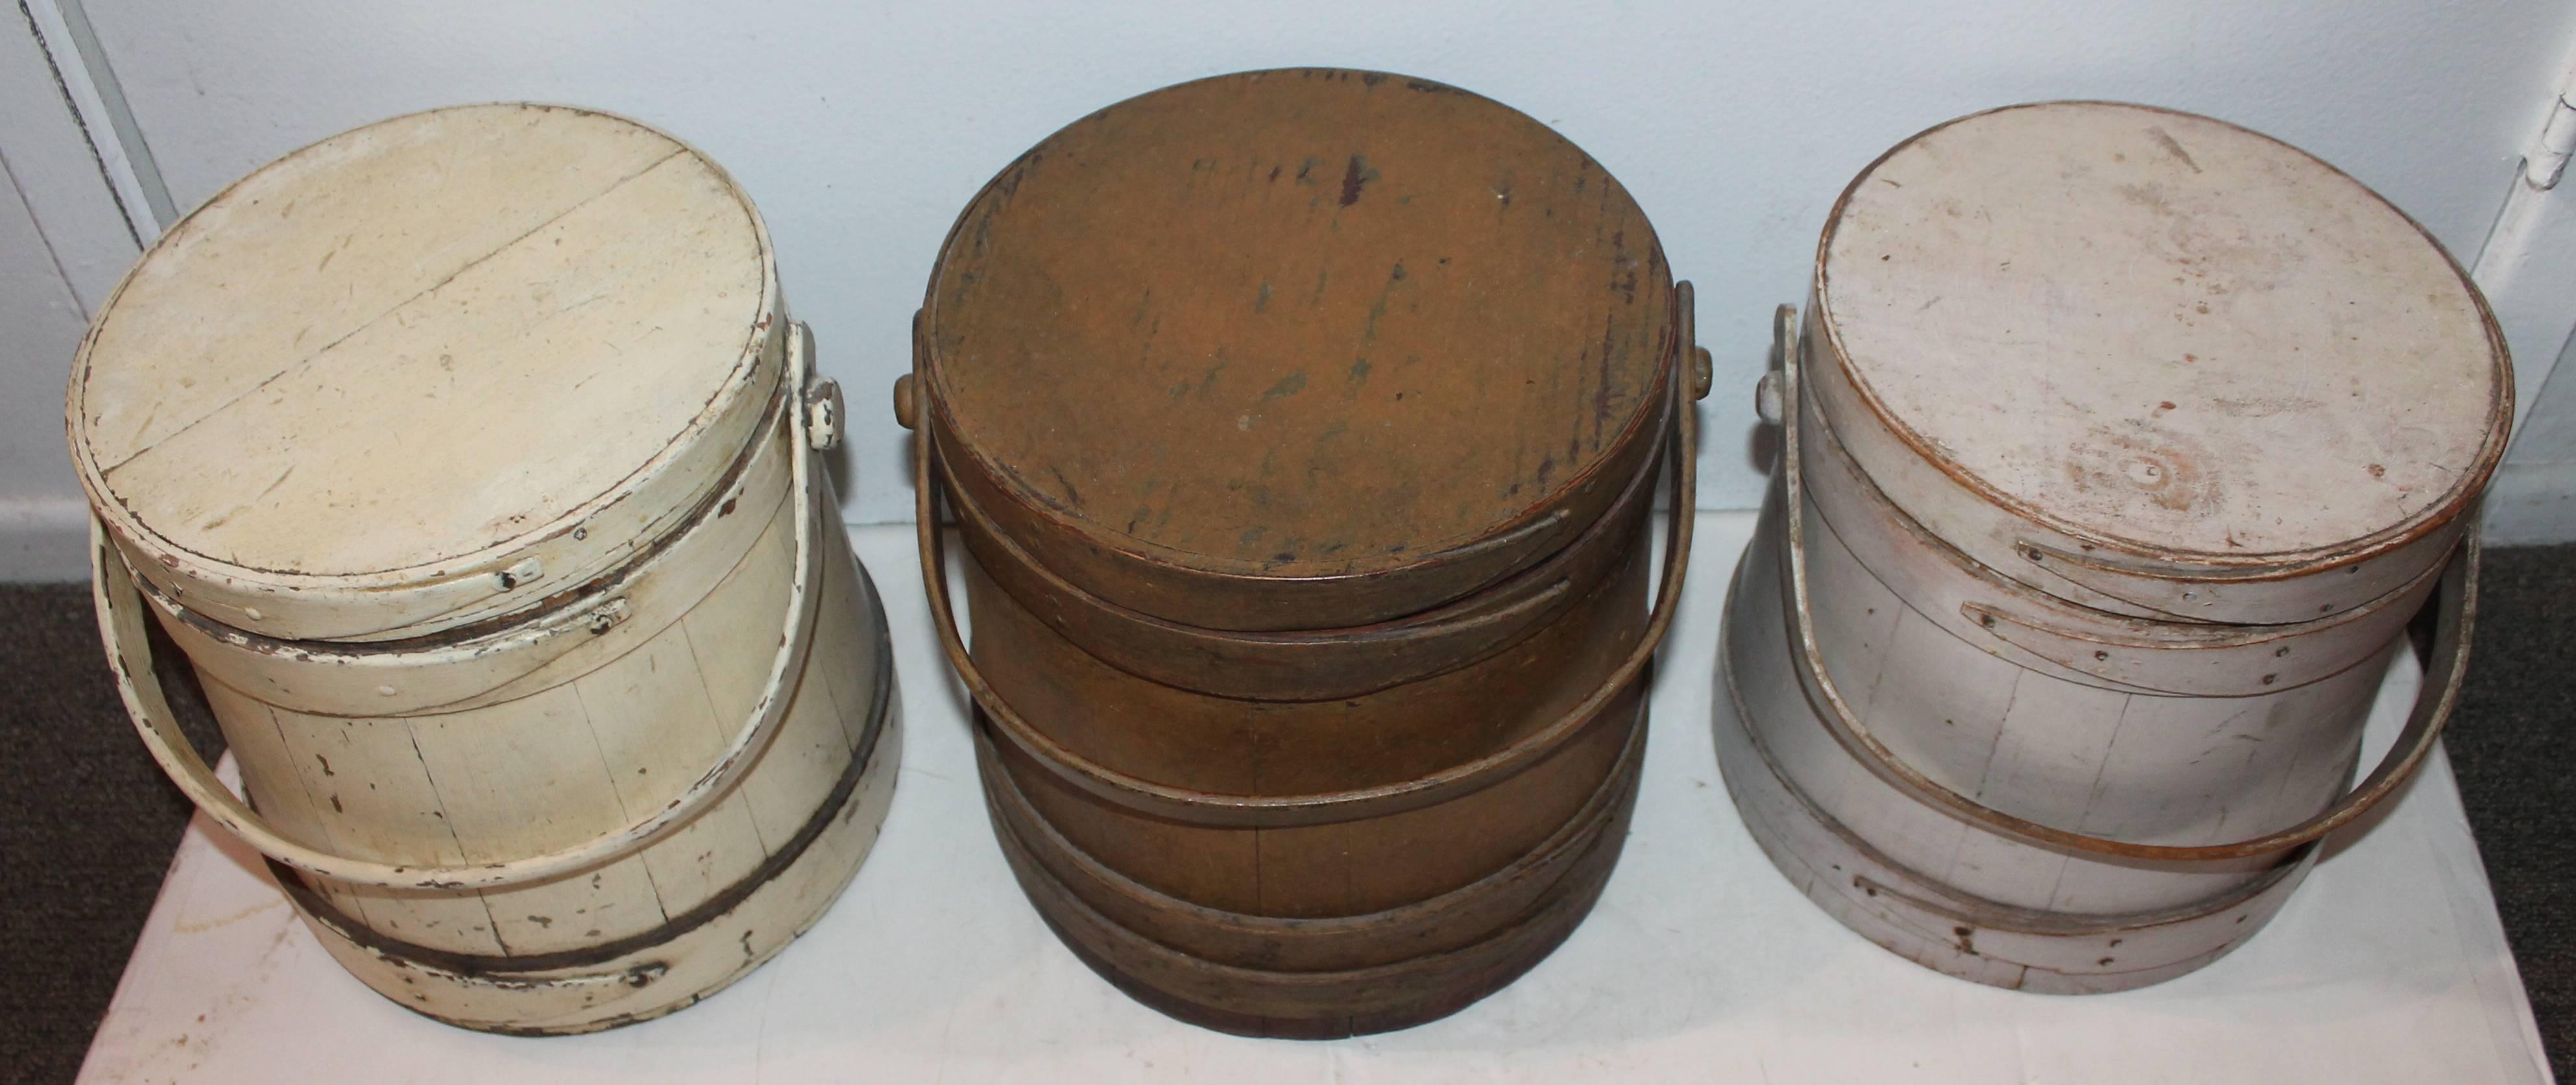 These three original painted 19th century furkins are in very good as found condition. The first to the left is in buttermilk colored paint. The second bucket is in a dirty mustard paint. Third bucket is in a blush or dirty off white surface. All